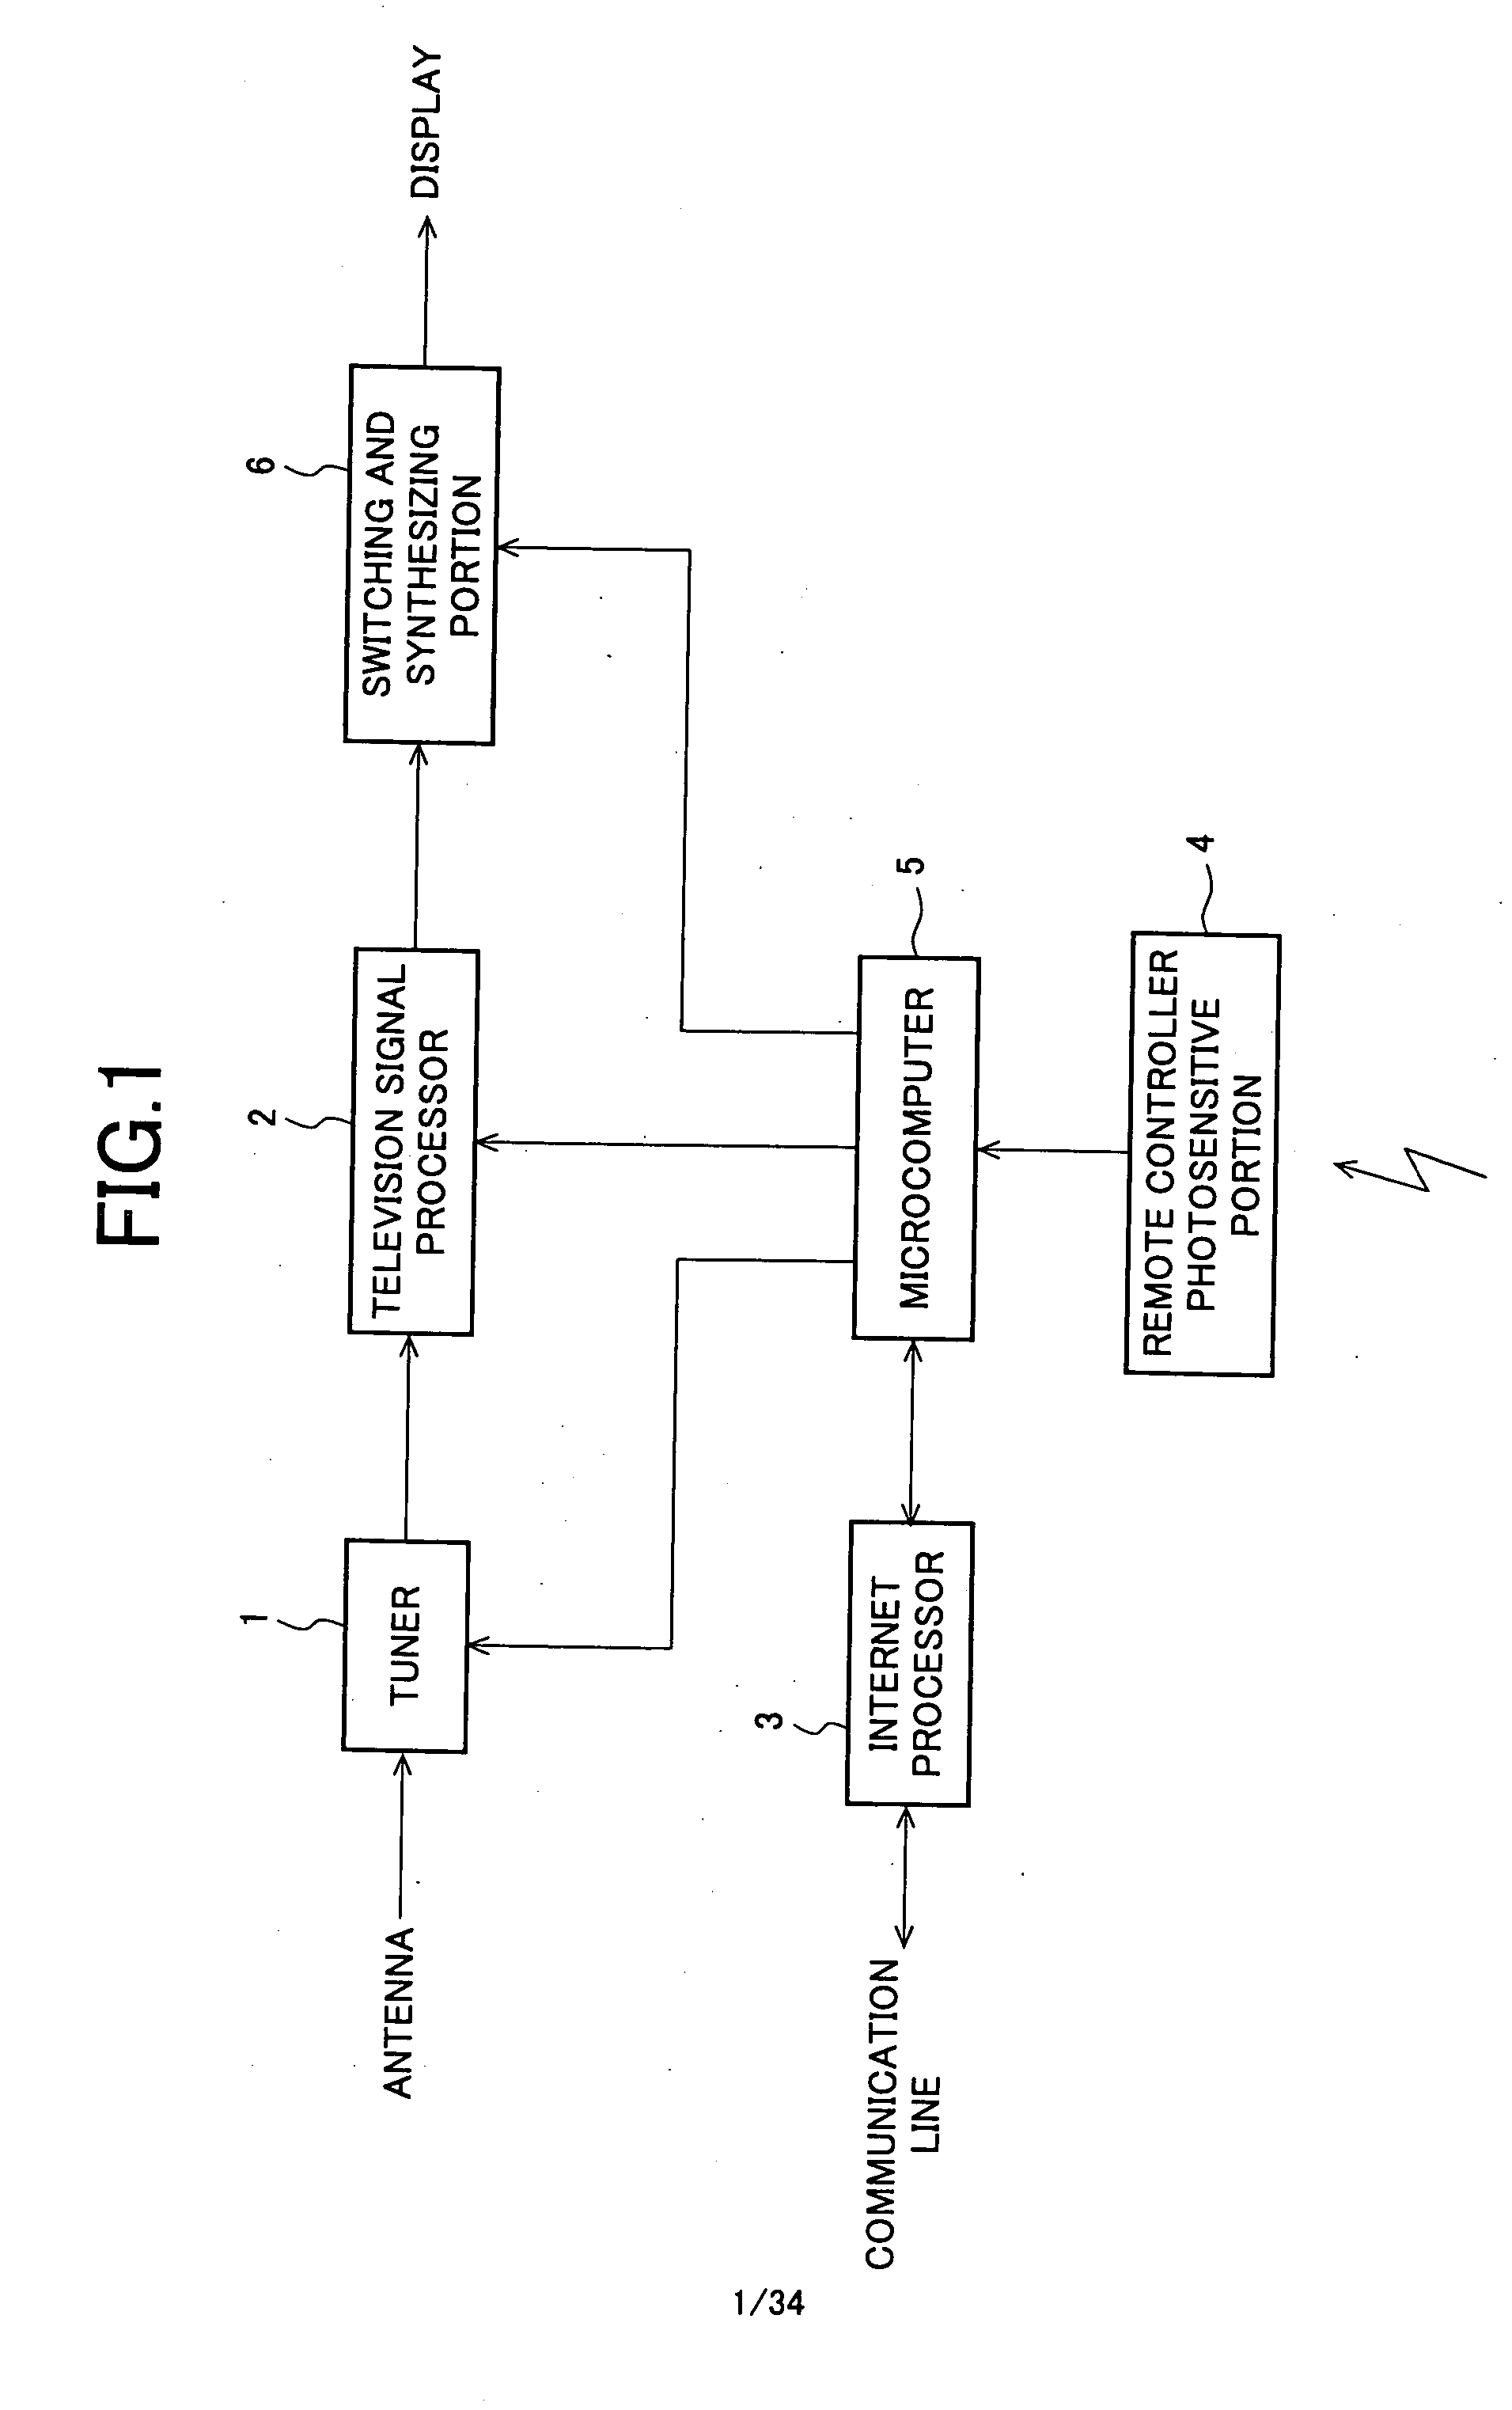 Image display device, image display method, and television receiver